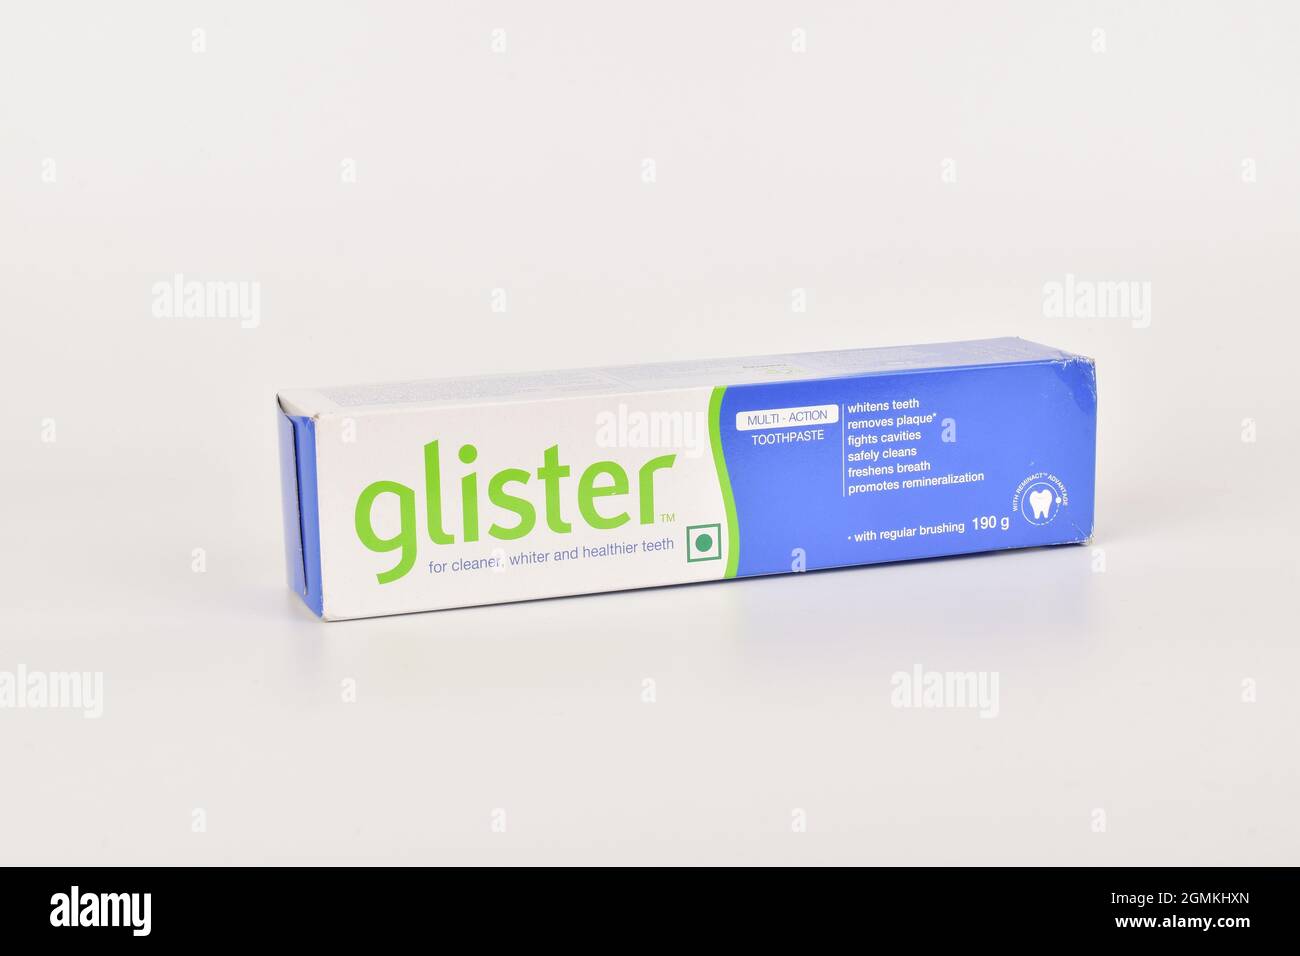 New Delhi, India - february 20, 2020: amway glister toothpaste isolated on white background Stock Photo